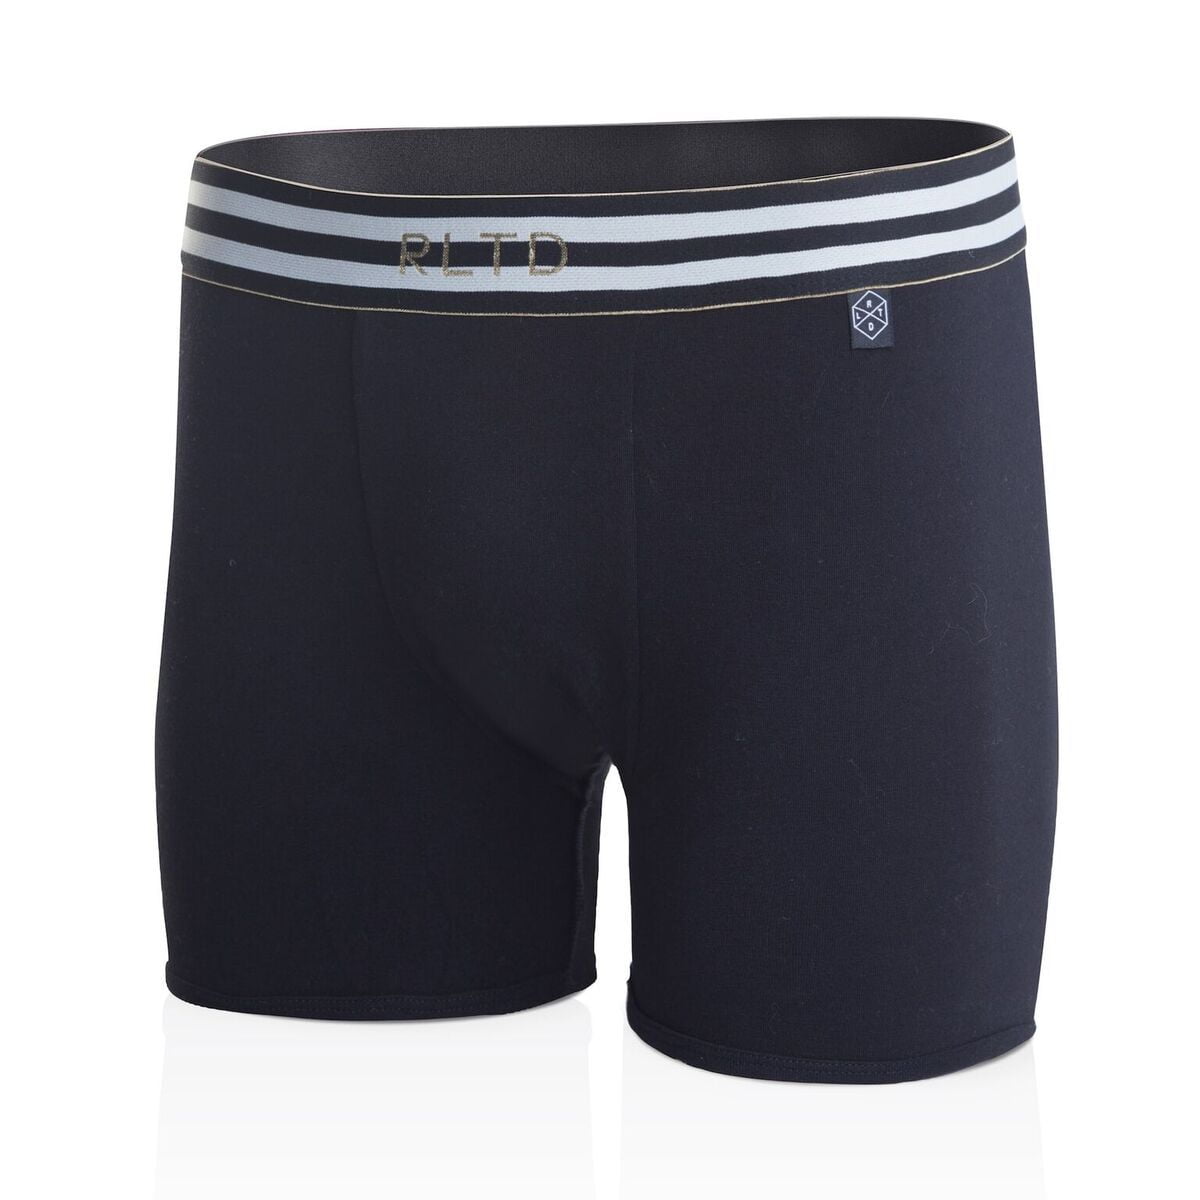 the racer boxer brief 1